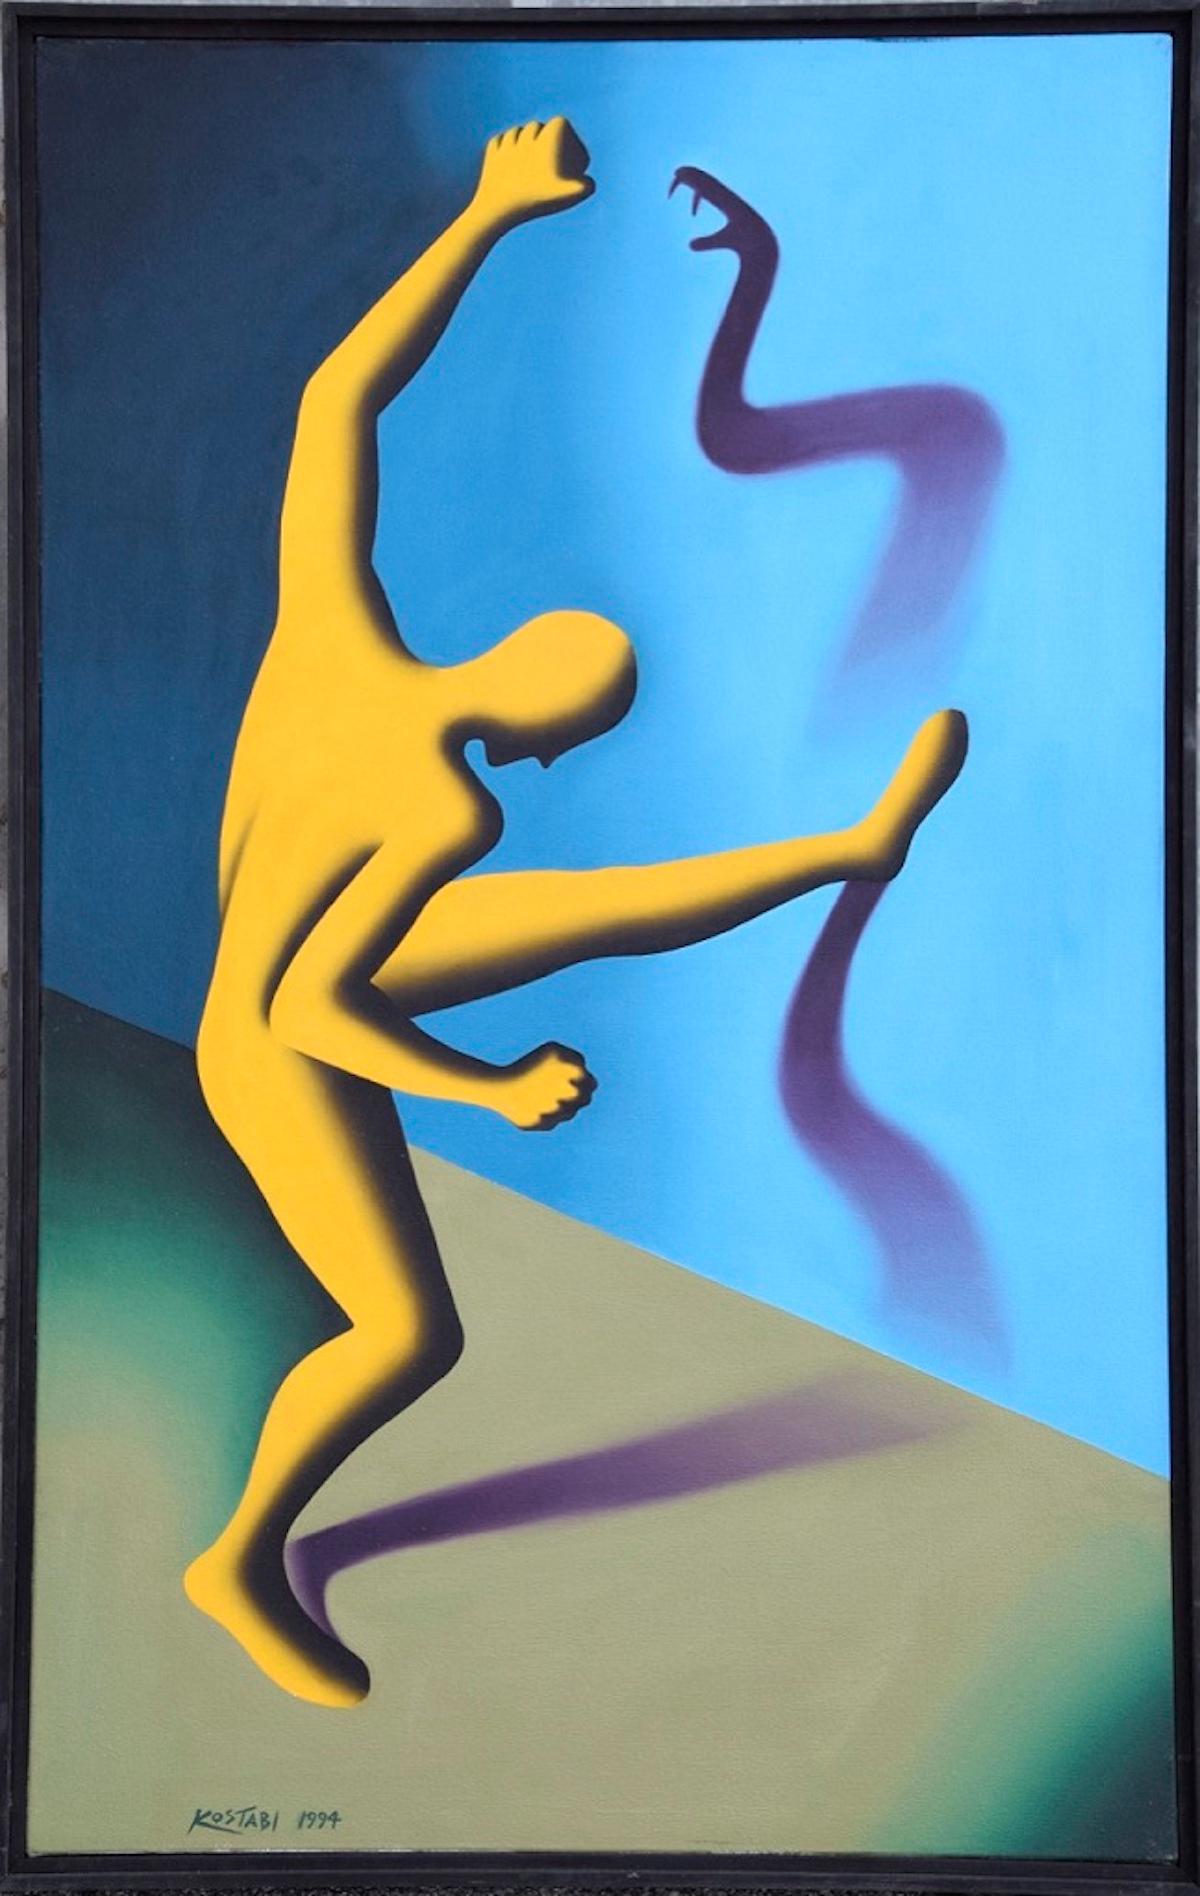 Mark Kostabi Figurative Painting - The Enemy Within - Original Oil on Canvas by M. Kostabi - 1994